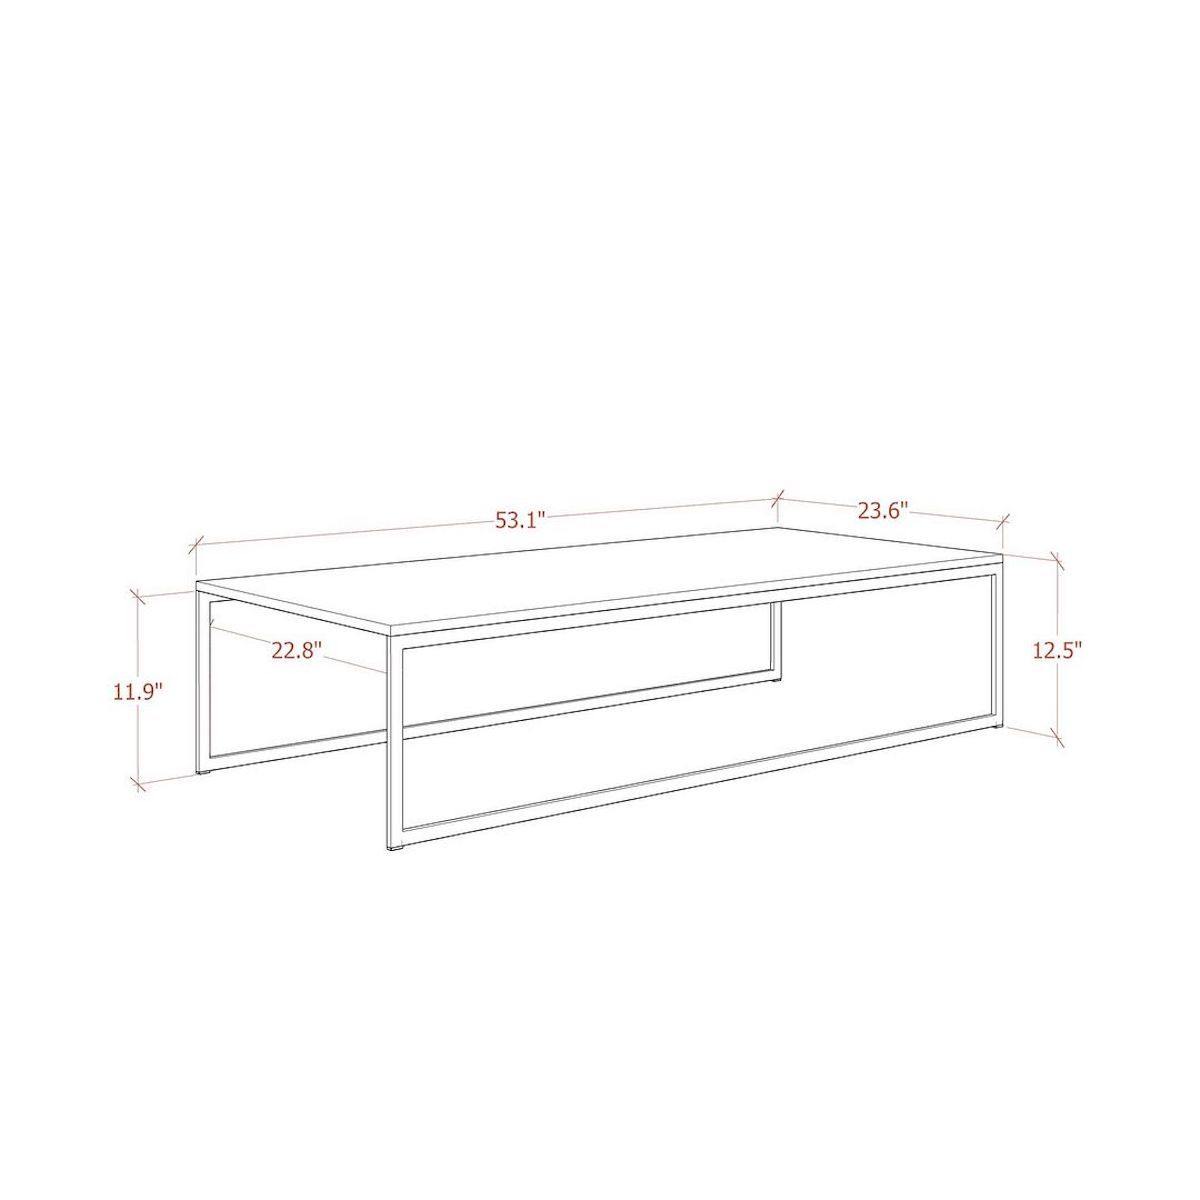 Manhattan Comfort Celine 53.14 Inch Coffee Table with Steel Legs 25535 Dimensions